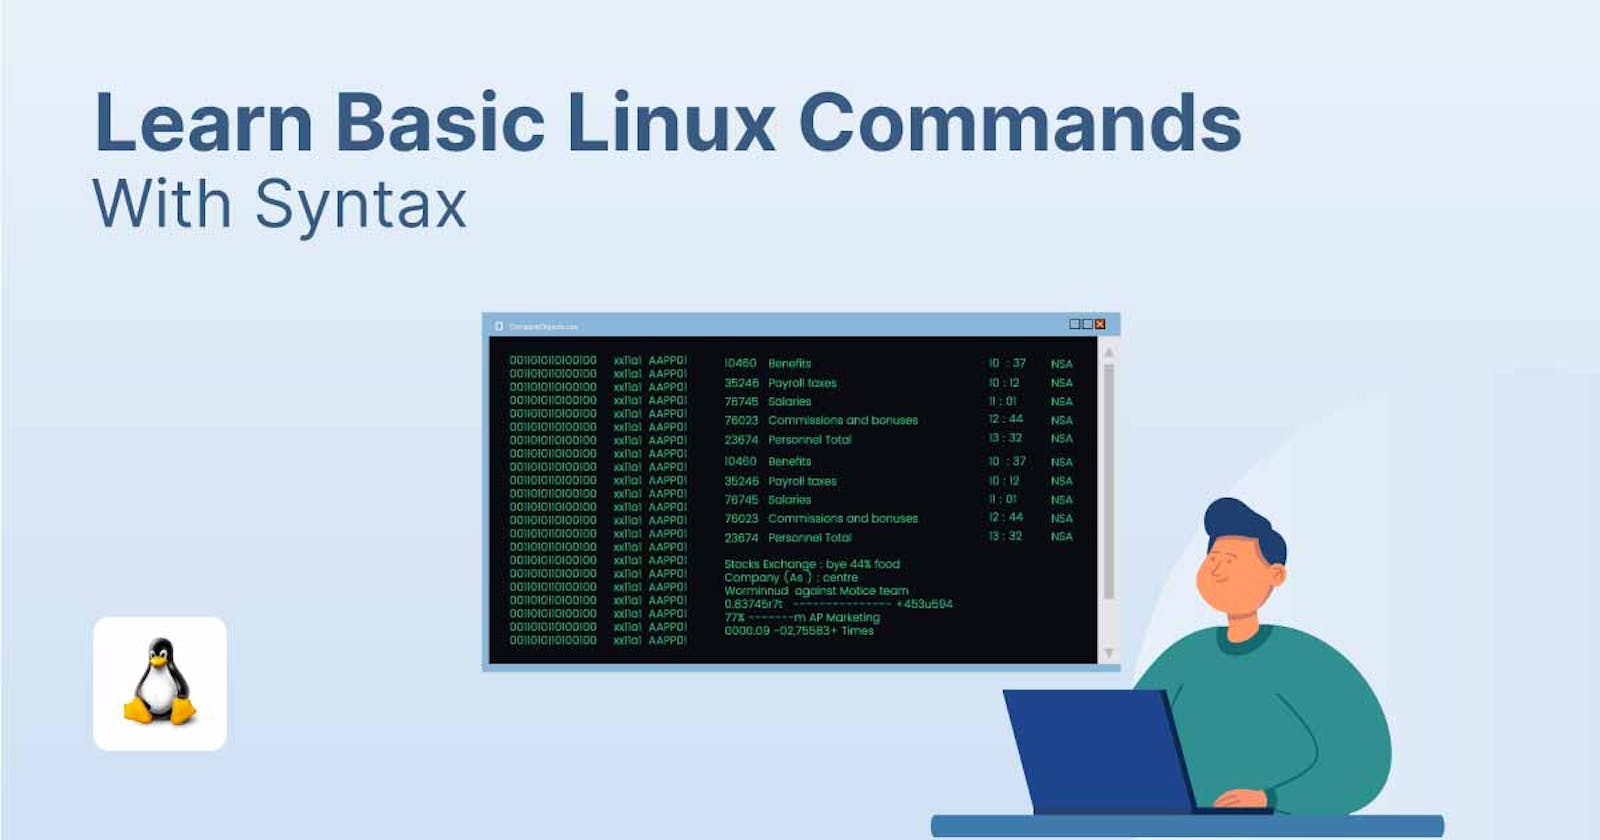 Basic Commands in Linux